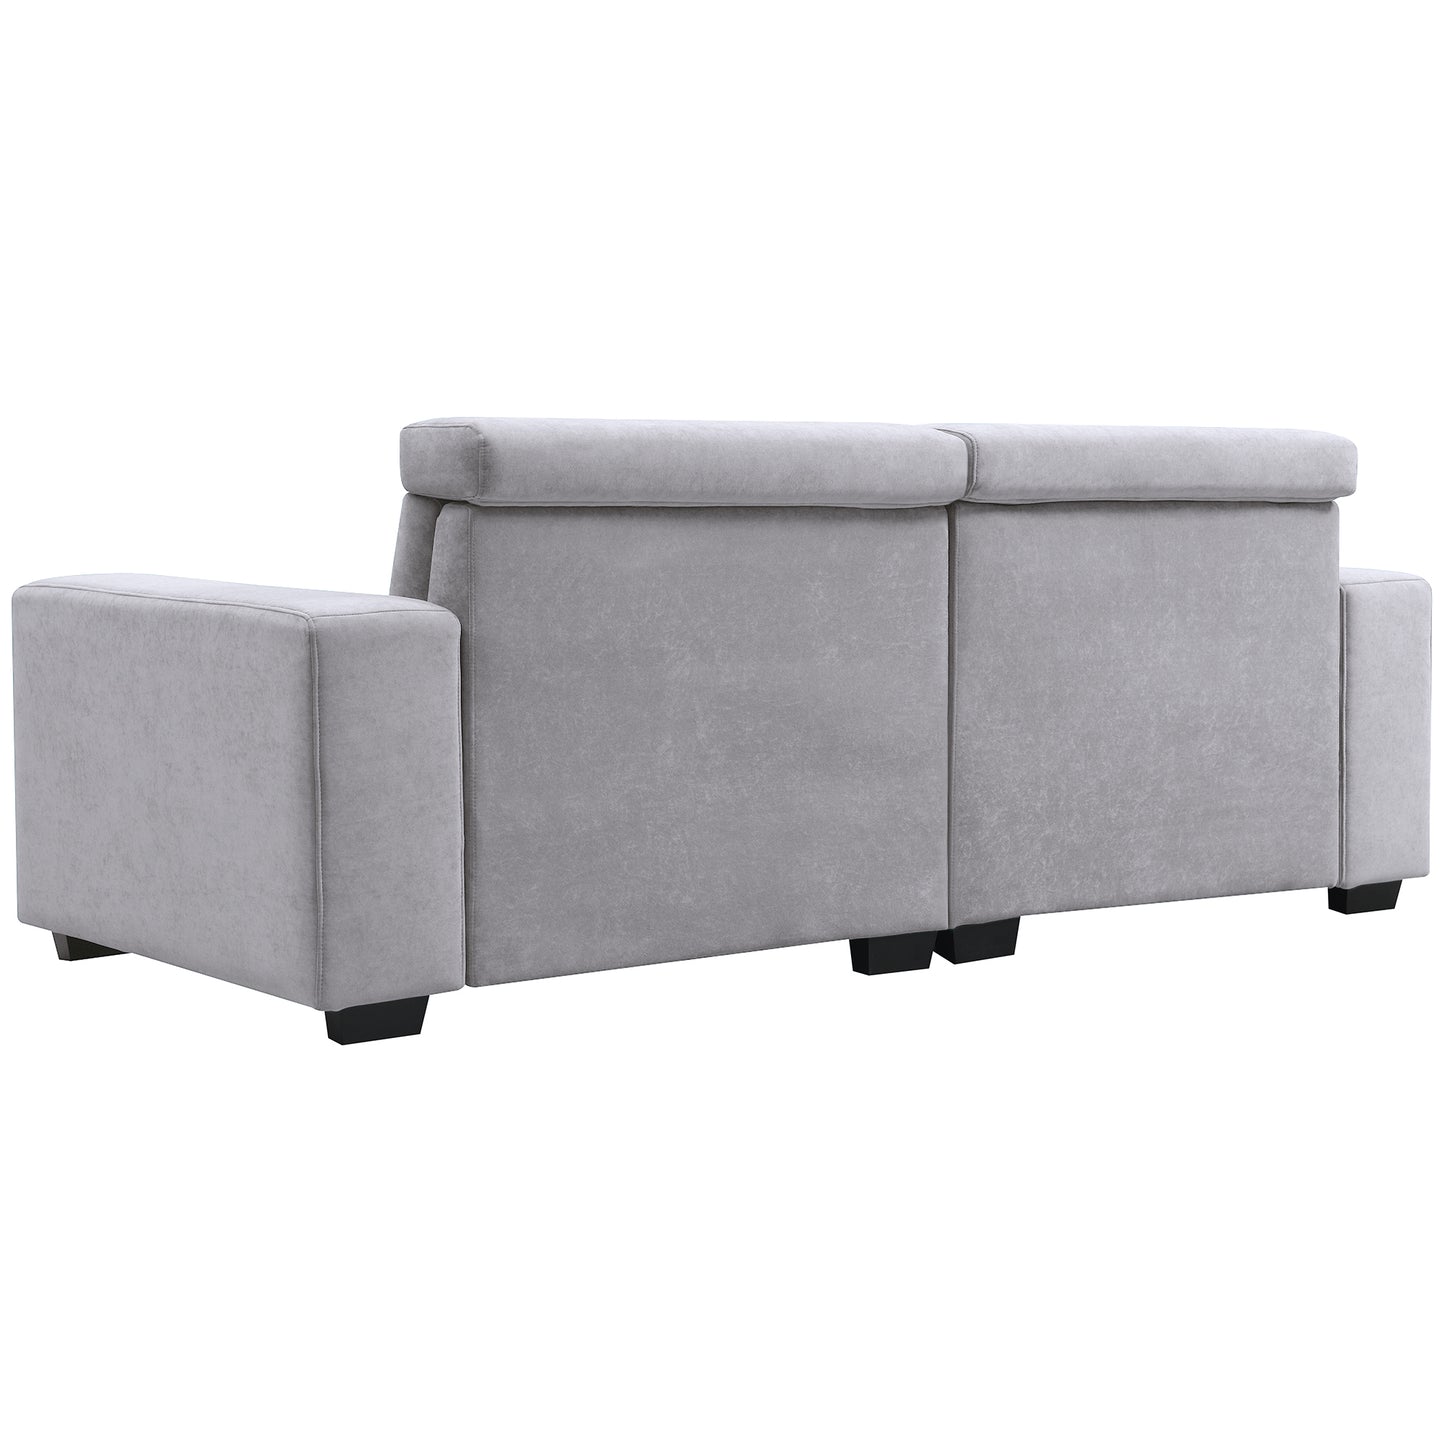 87*34.2'' 2-3 Seater Sectional Sofa Couch with Multi-Angle Adjustable Headrest,Spacious and Comfortable Velvet Loveseat for Living Room,Studios,Salon,, Office,Apartment,3 Colors